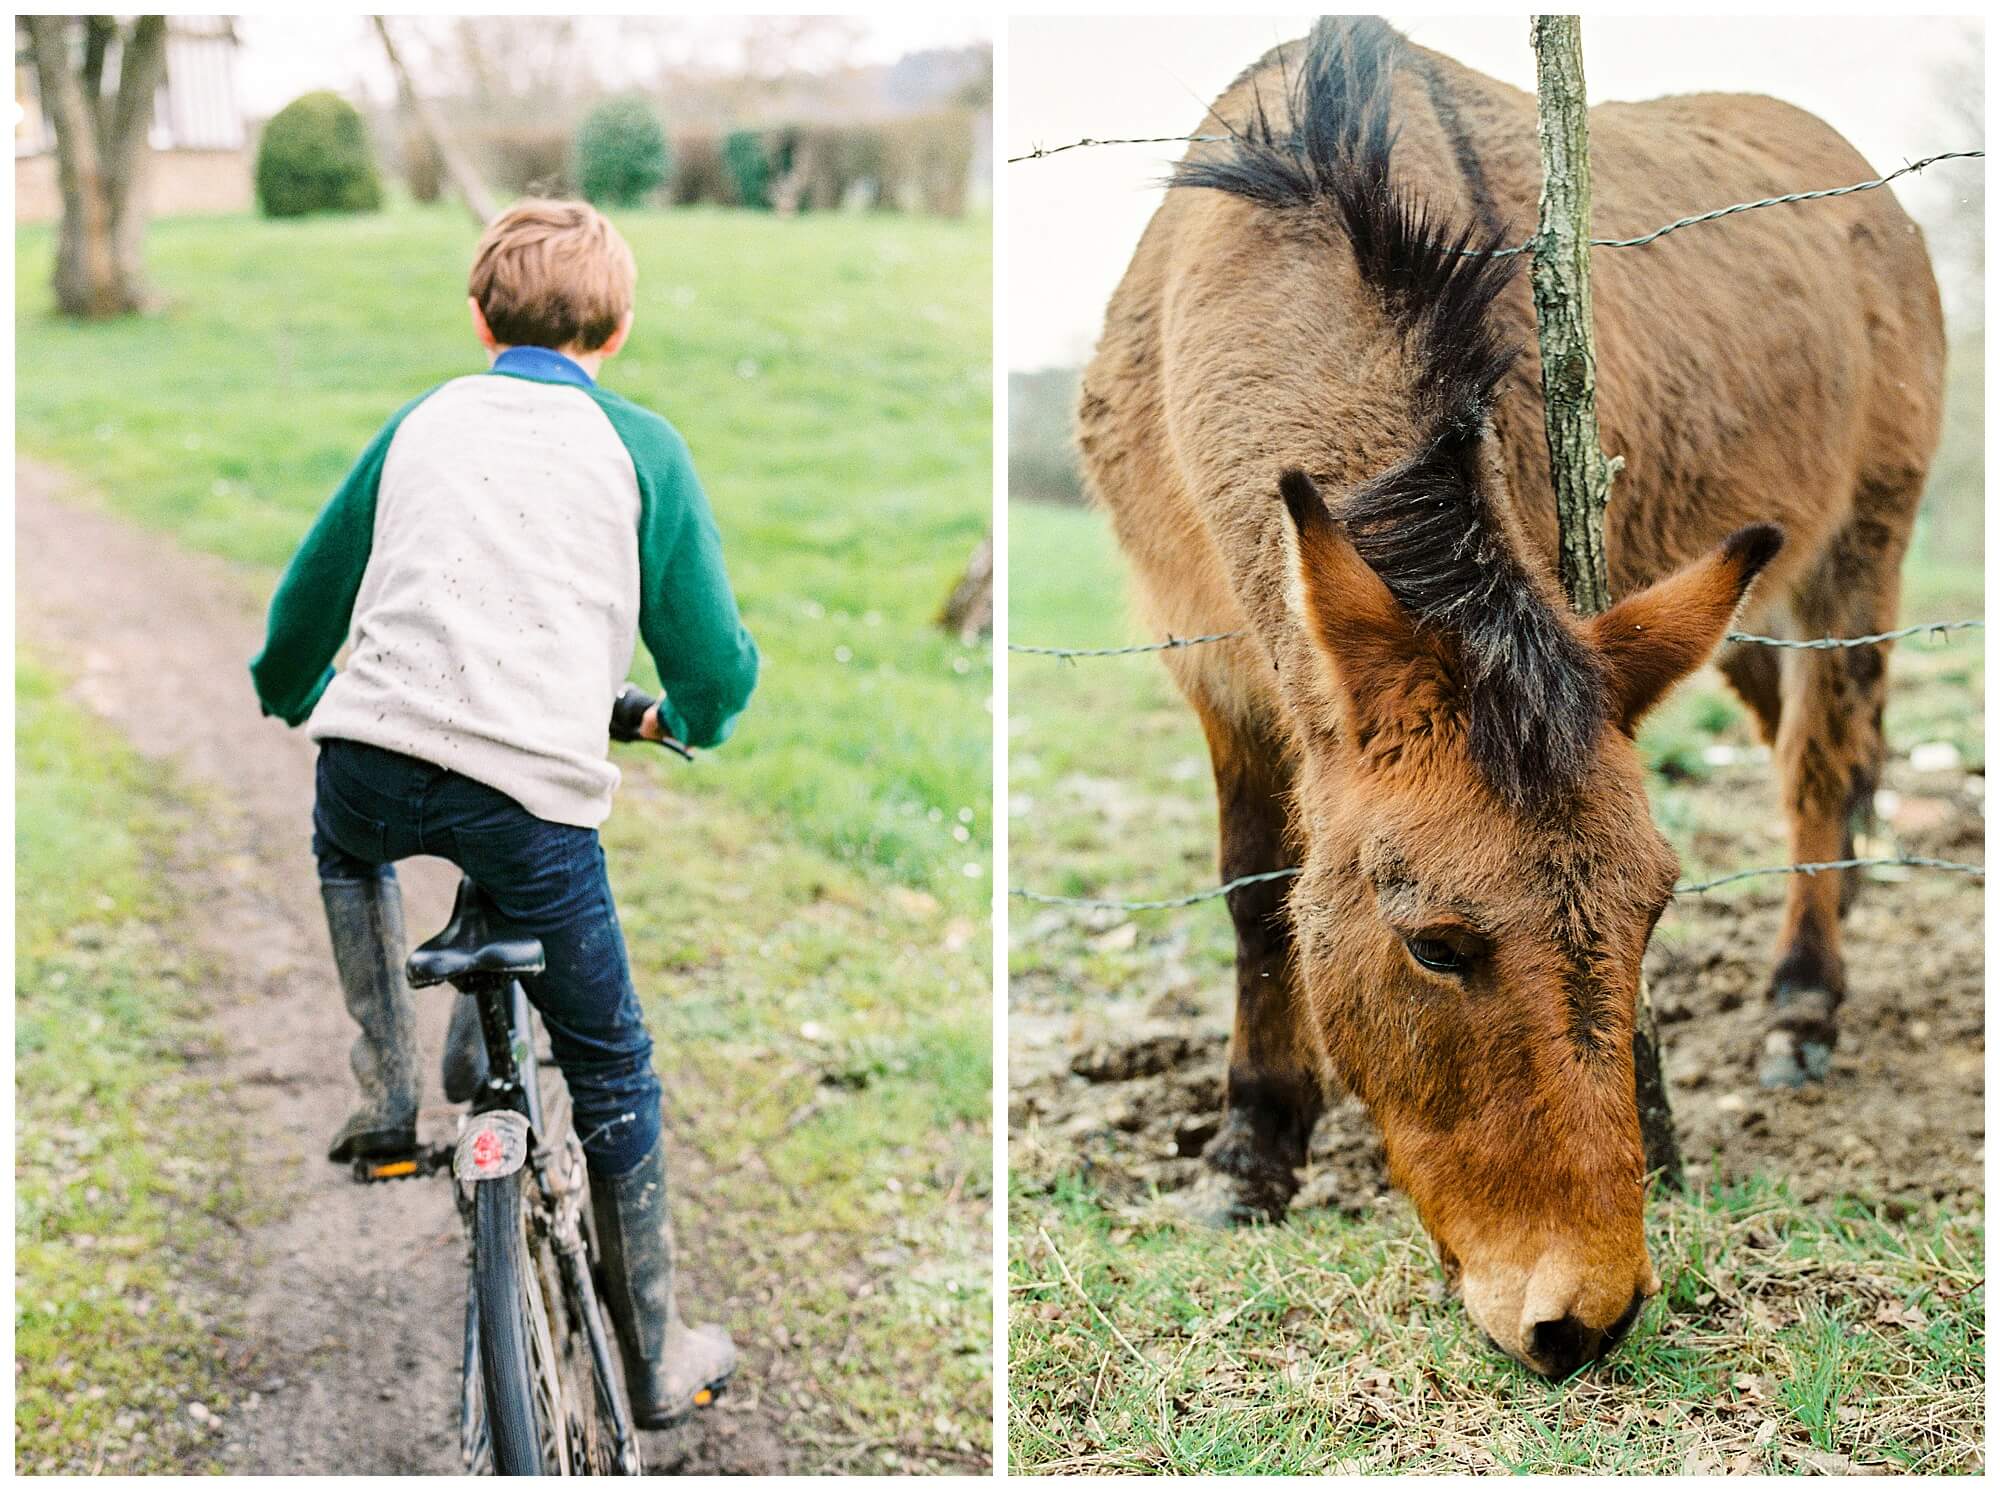 Left: A young French boy, wearing a mud-splattered sweater, careens down the unpaved path leading to the country cottage on his bicycle. Right: The neighboring donkey munches on some grass under a cloudy sky.